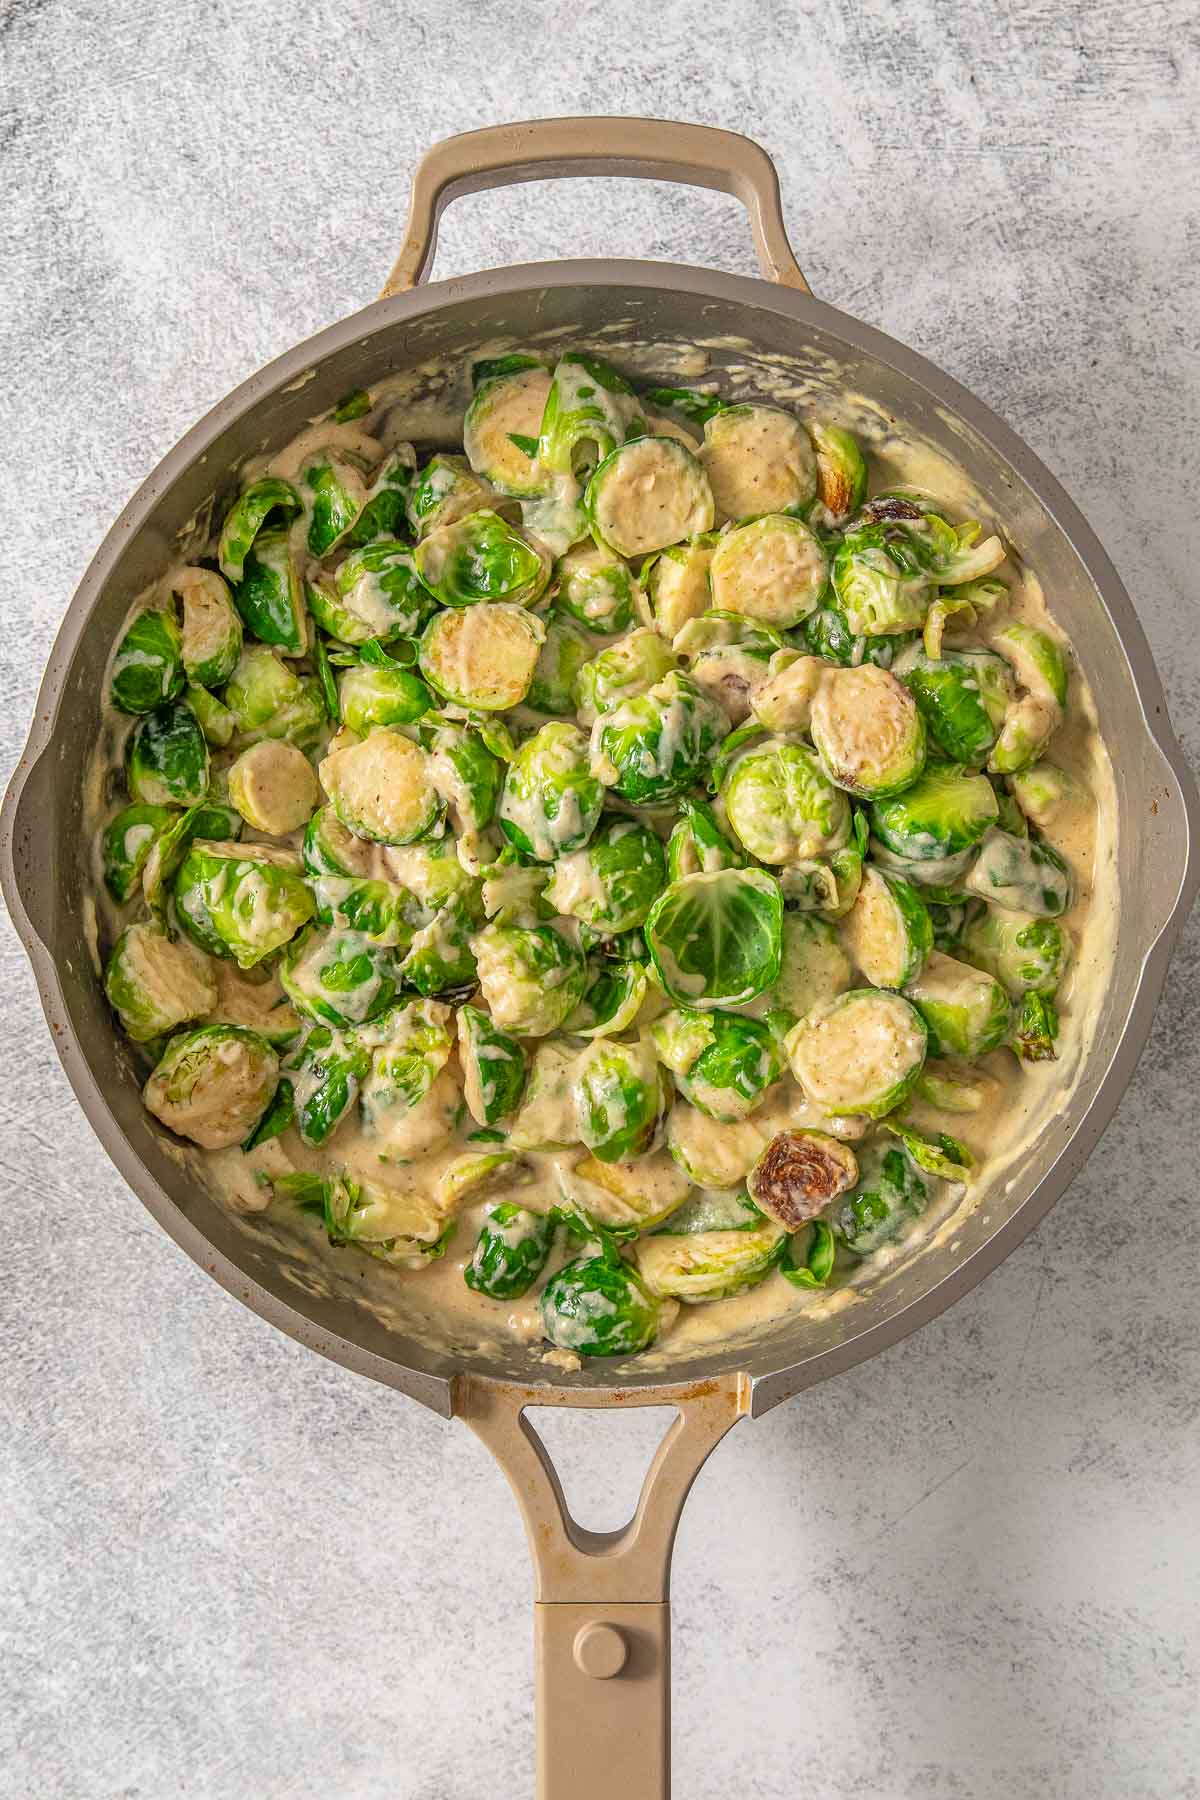 A skillet filled with brussel sprouts and sauce.